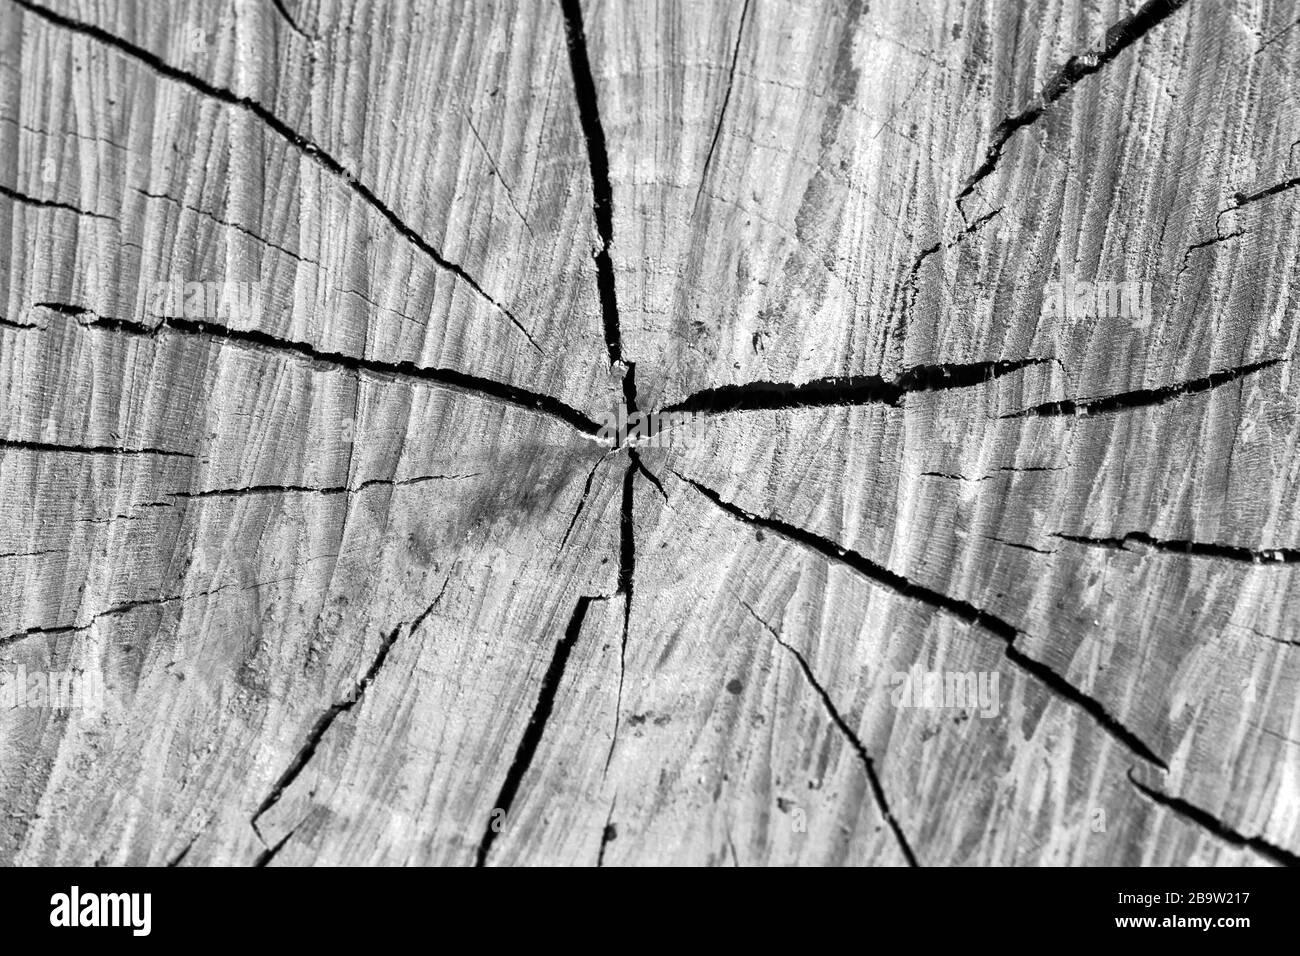 Circular wooden pattern with cracks on a log section, black and white background texture Stock Photo